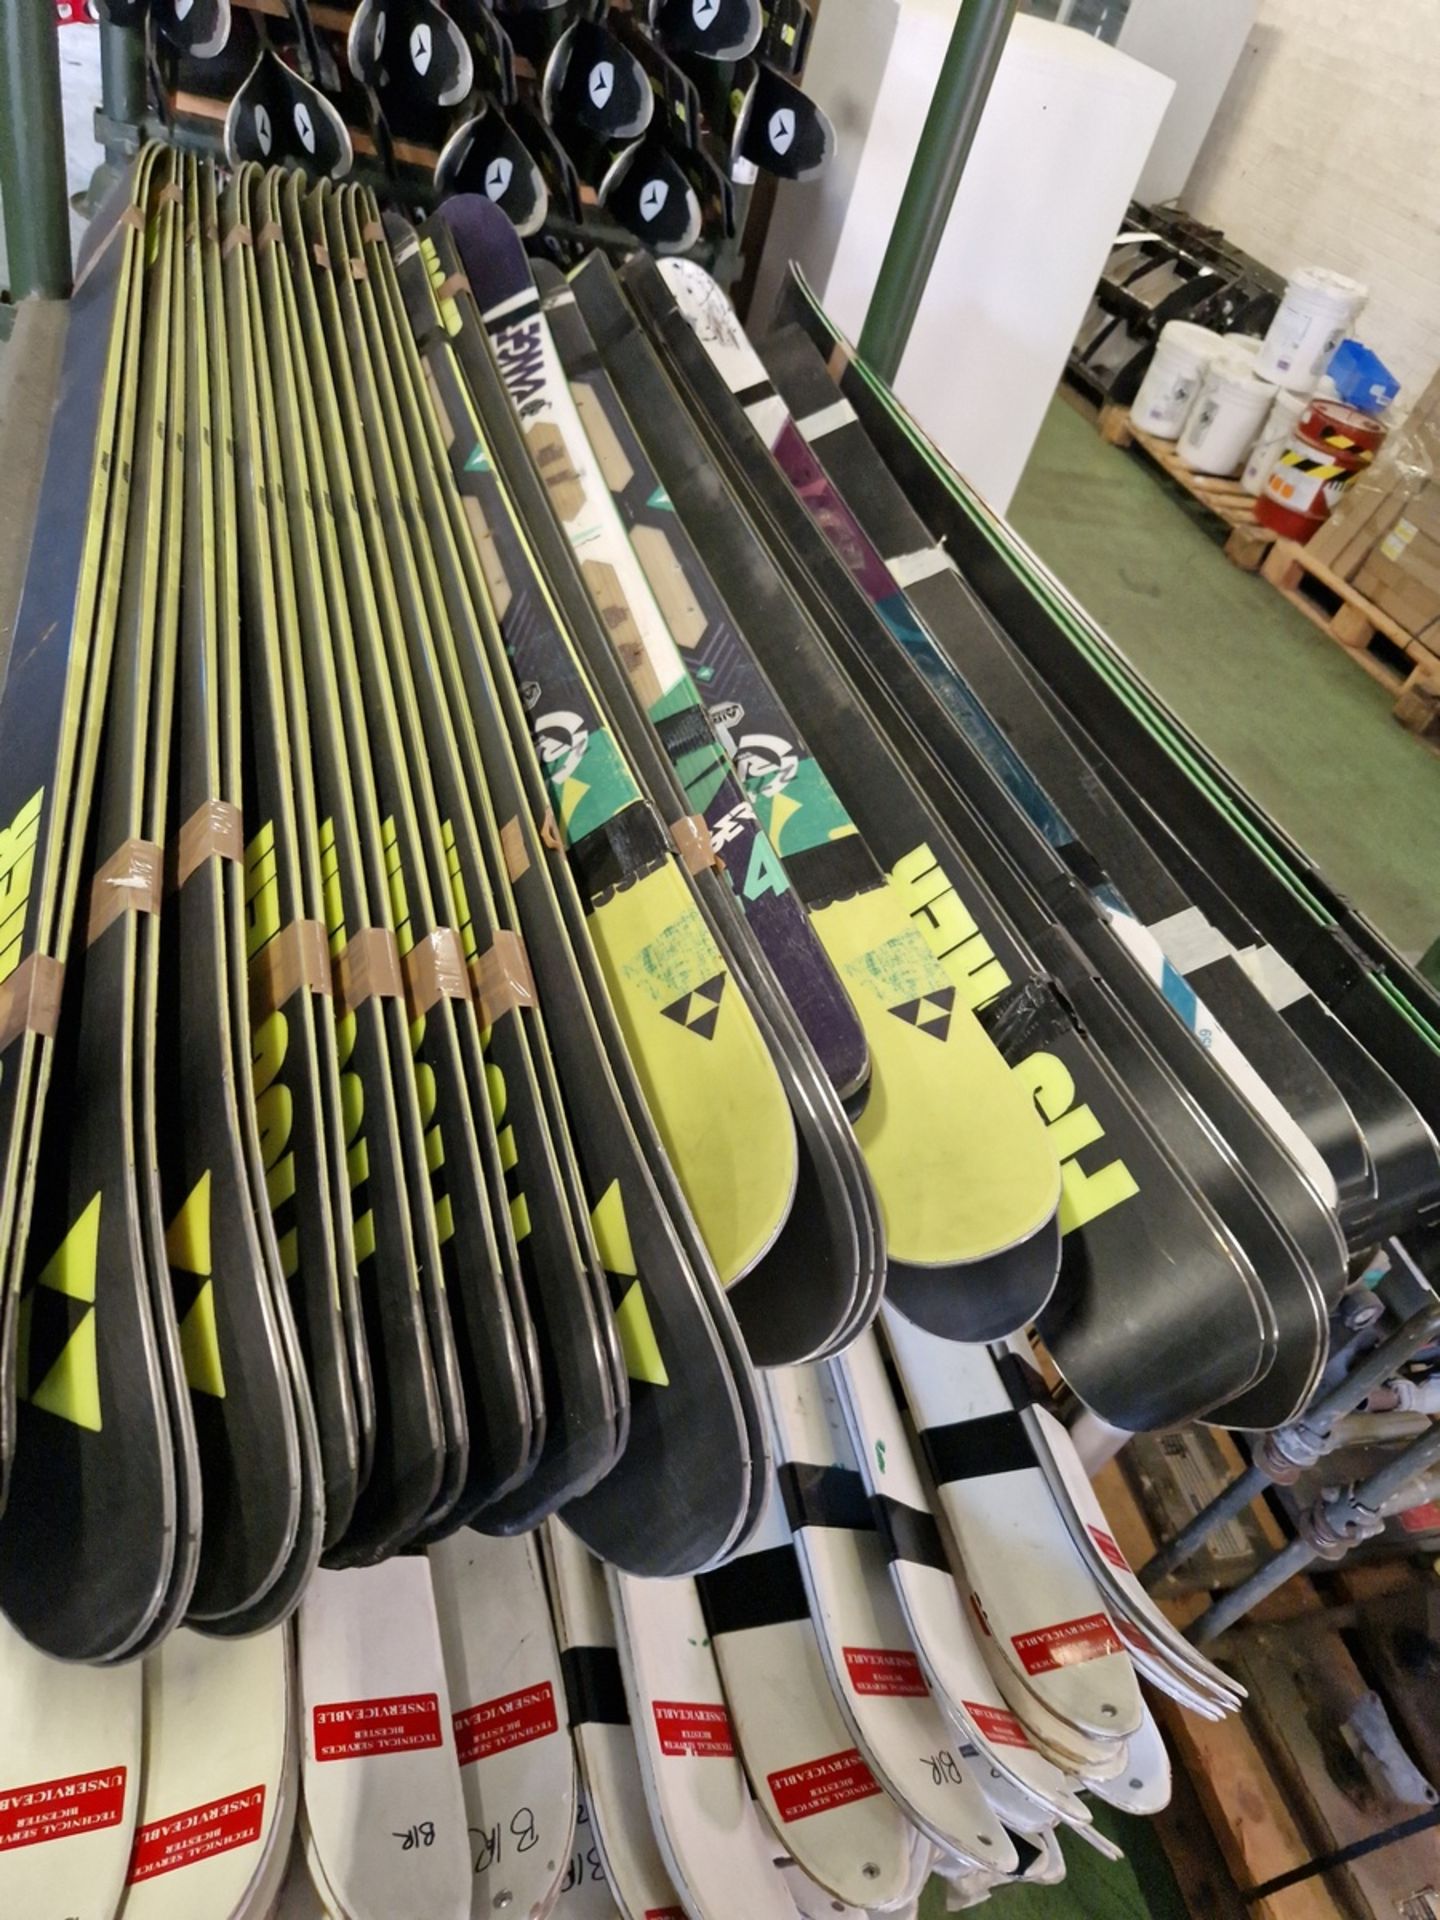 White nordic combat skis - no clamps - approx. 145 pairs, Fischer skis - no clamps - 20 pairs - Image 3 of 9